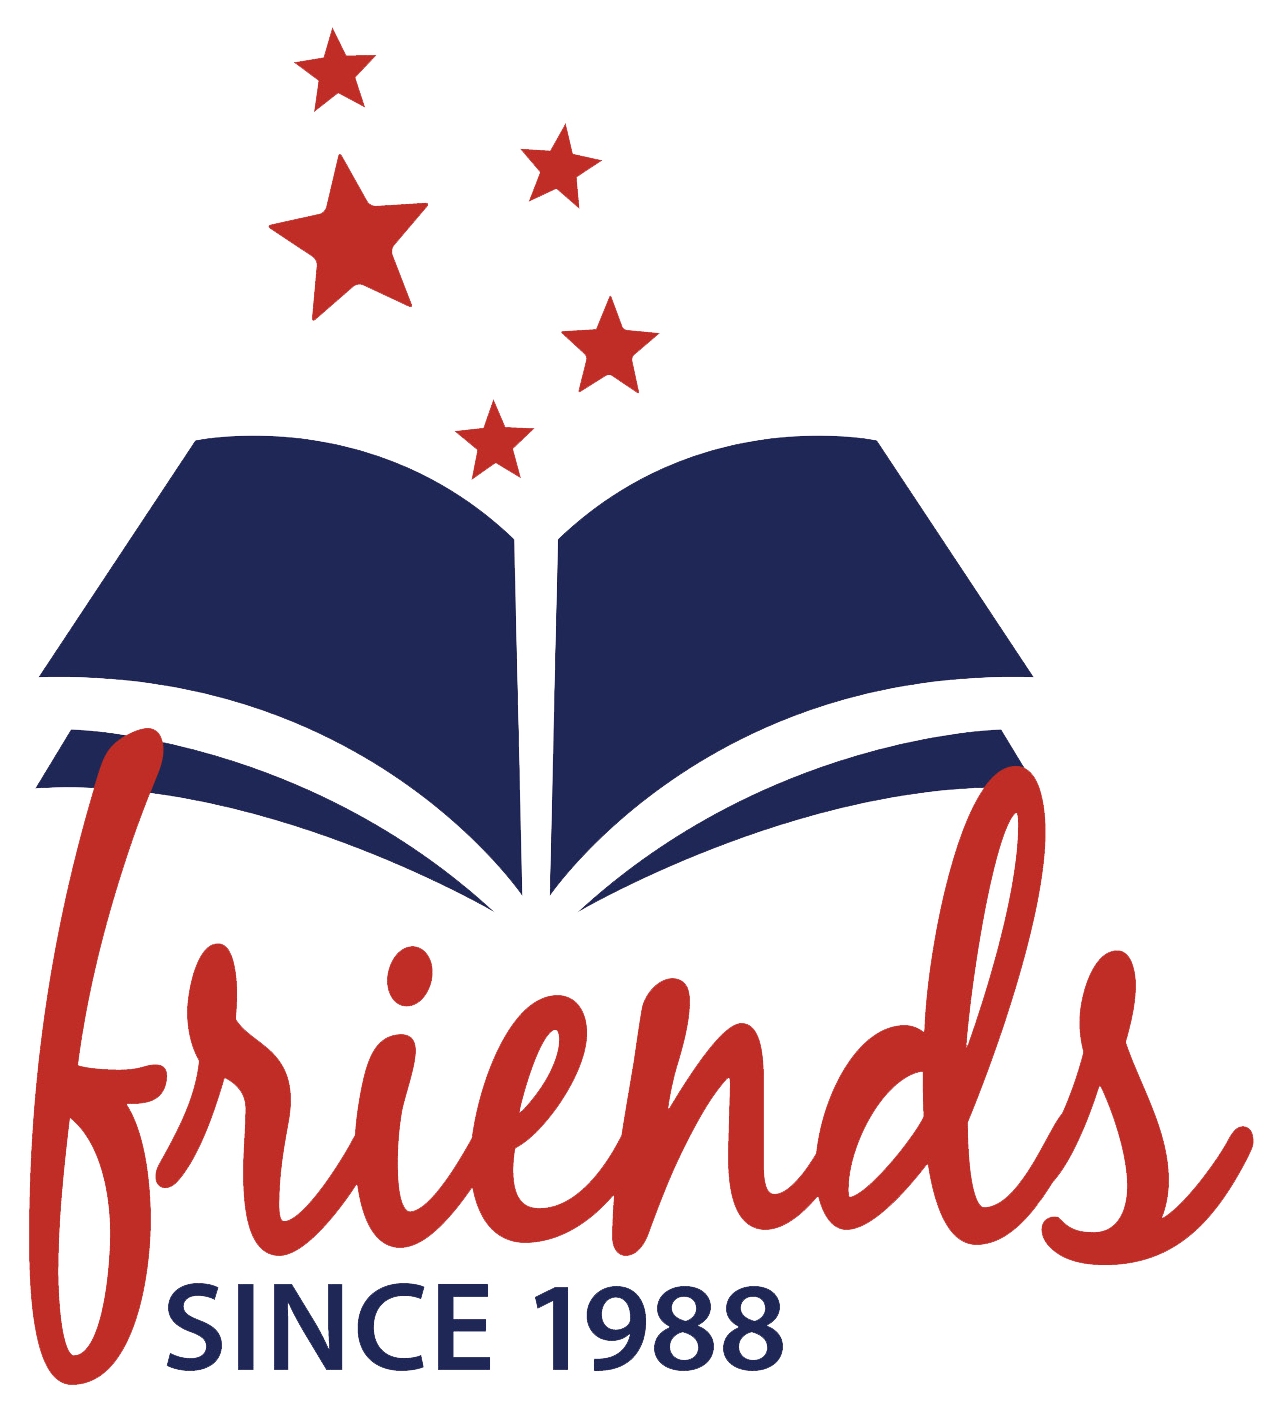 National bestselling author will speak May 1 at Friends of FDLPL Annual Meeting